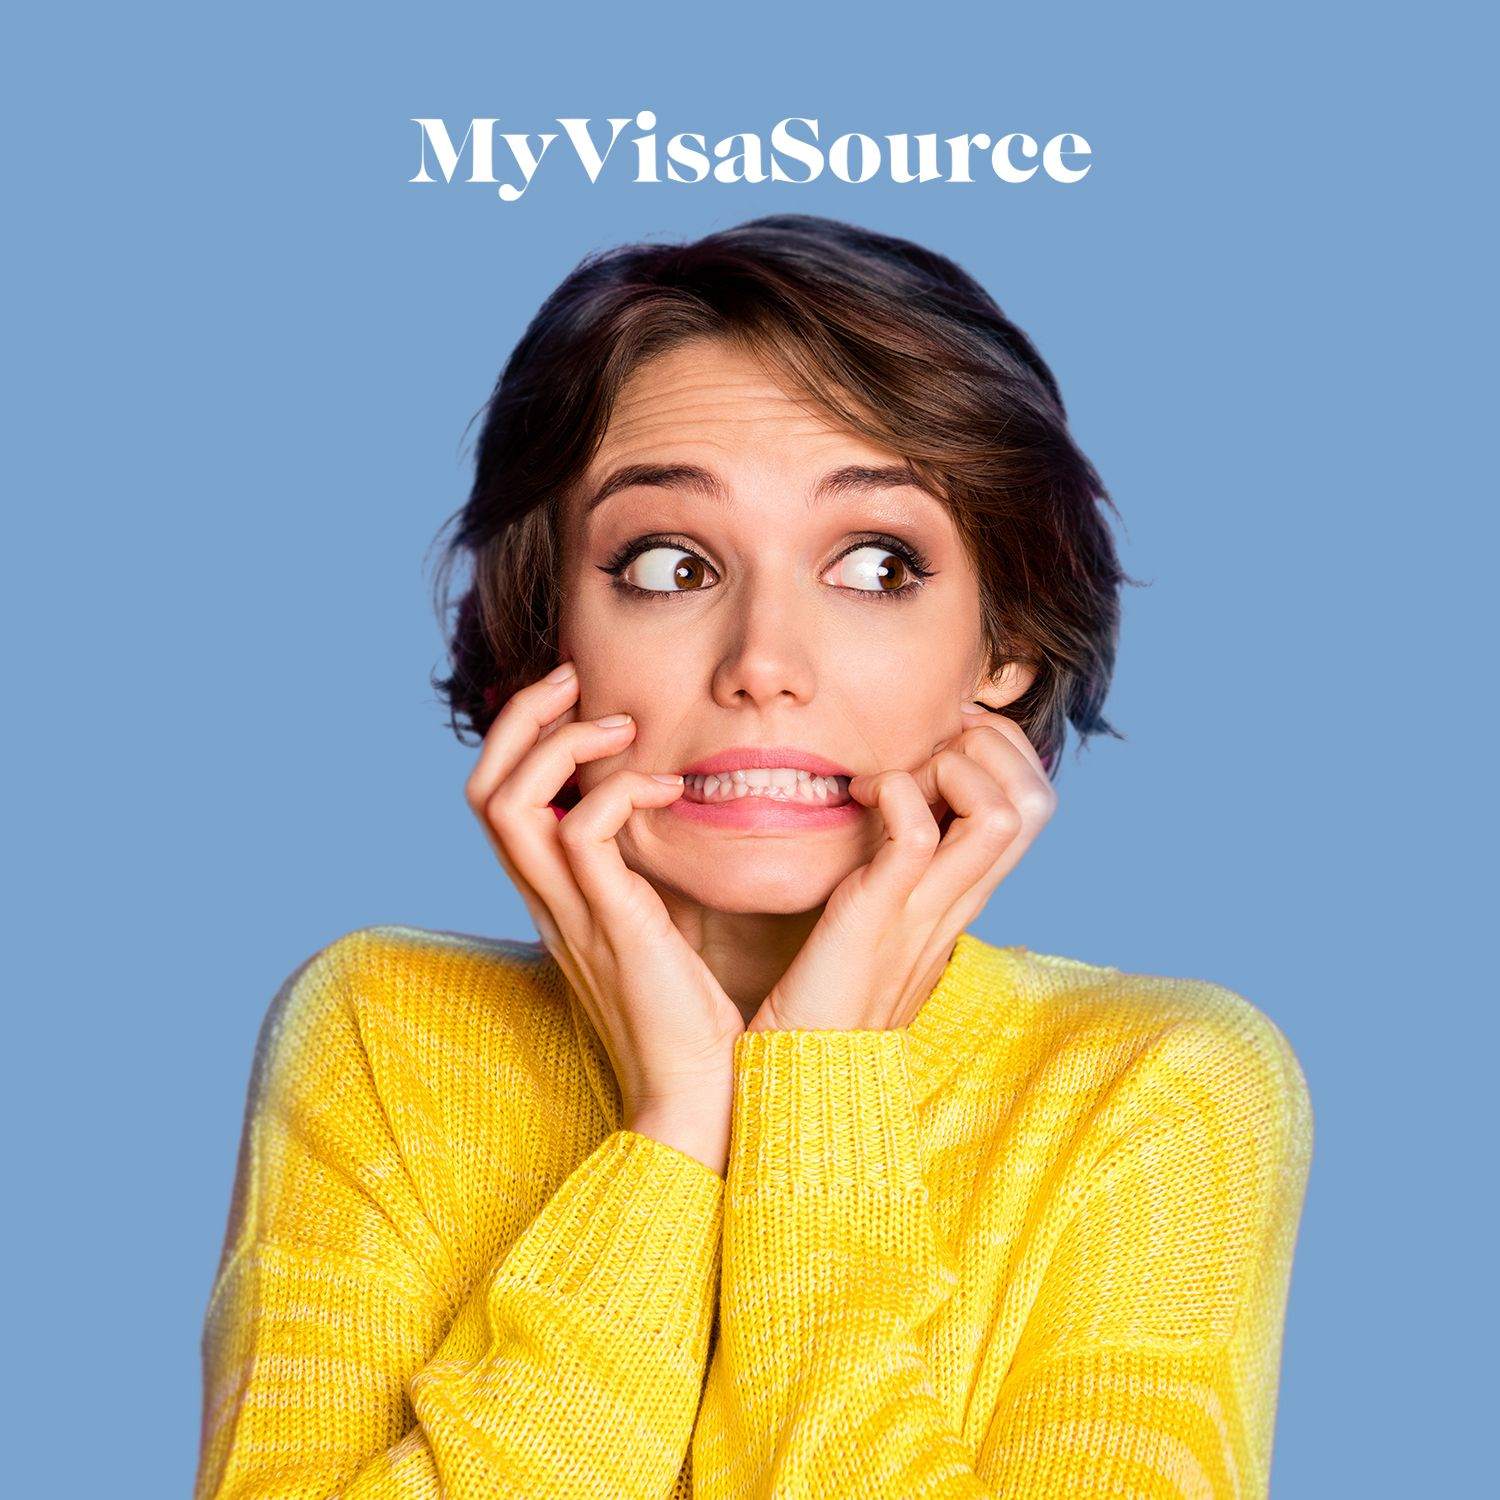 woman has a surprised face my visa source